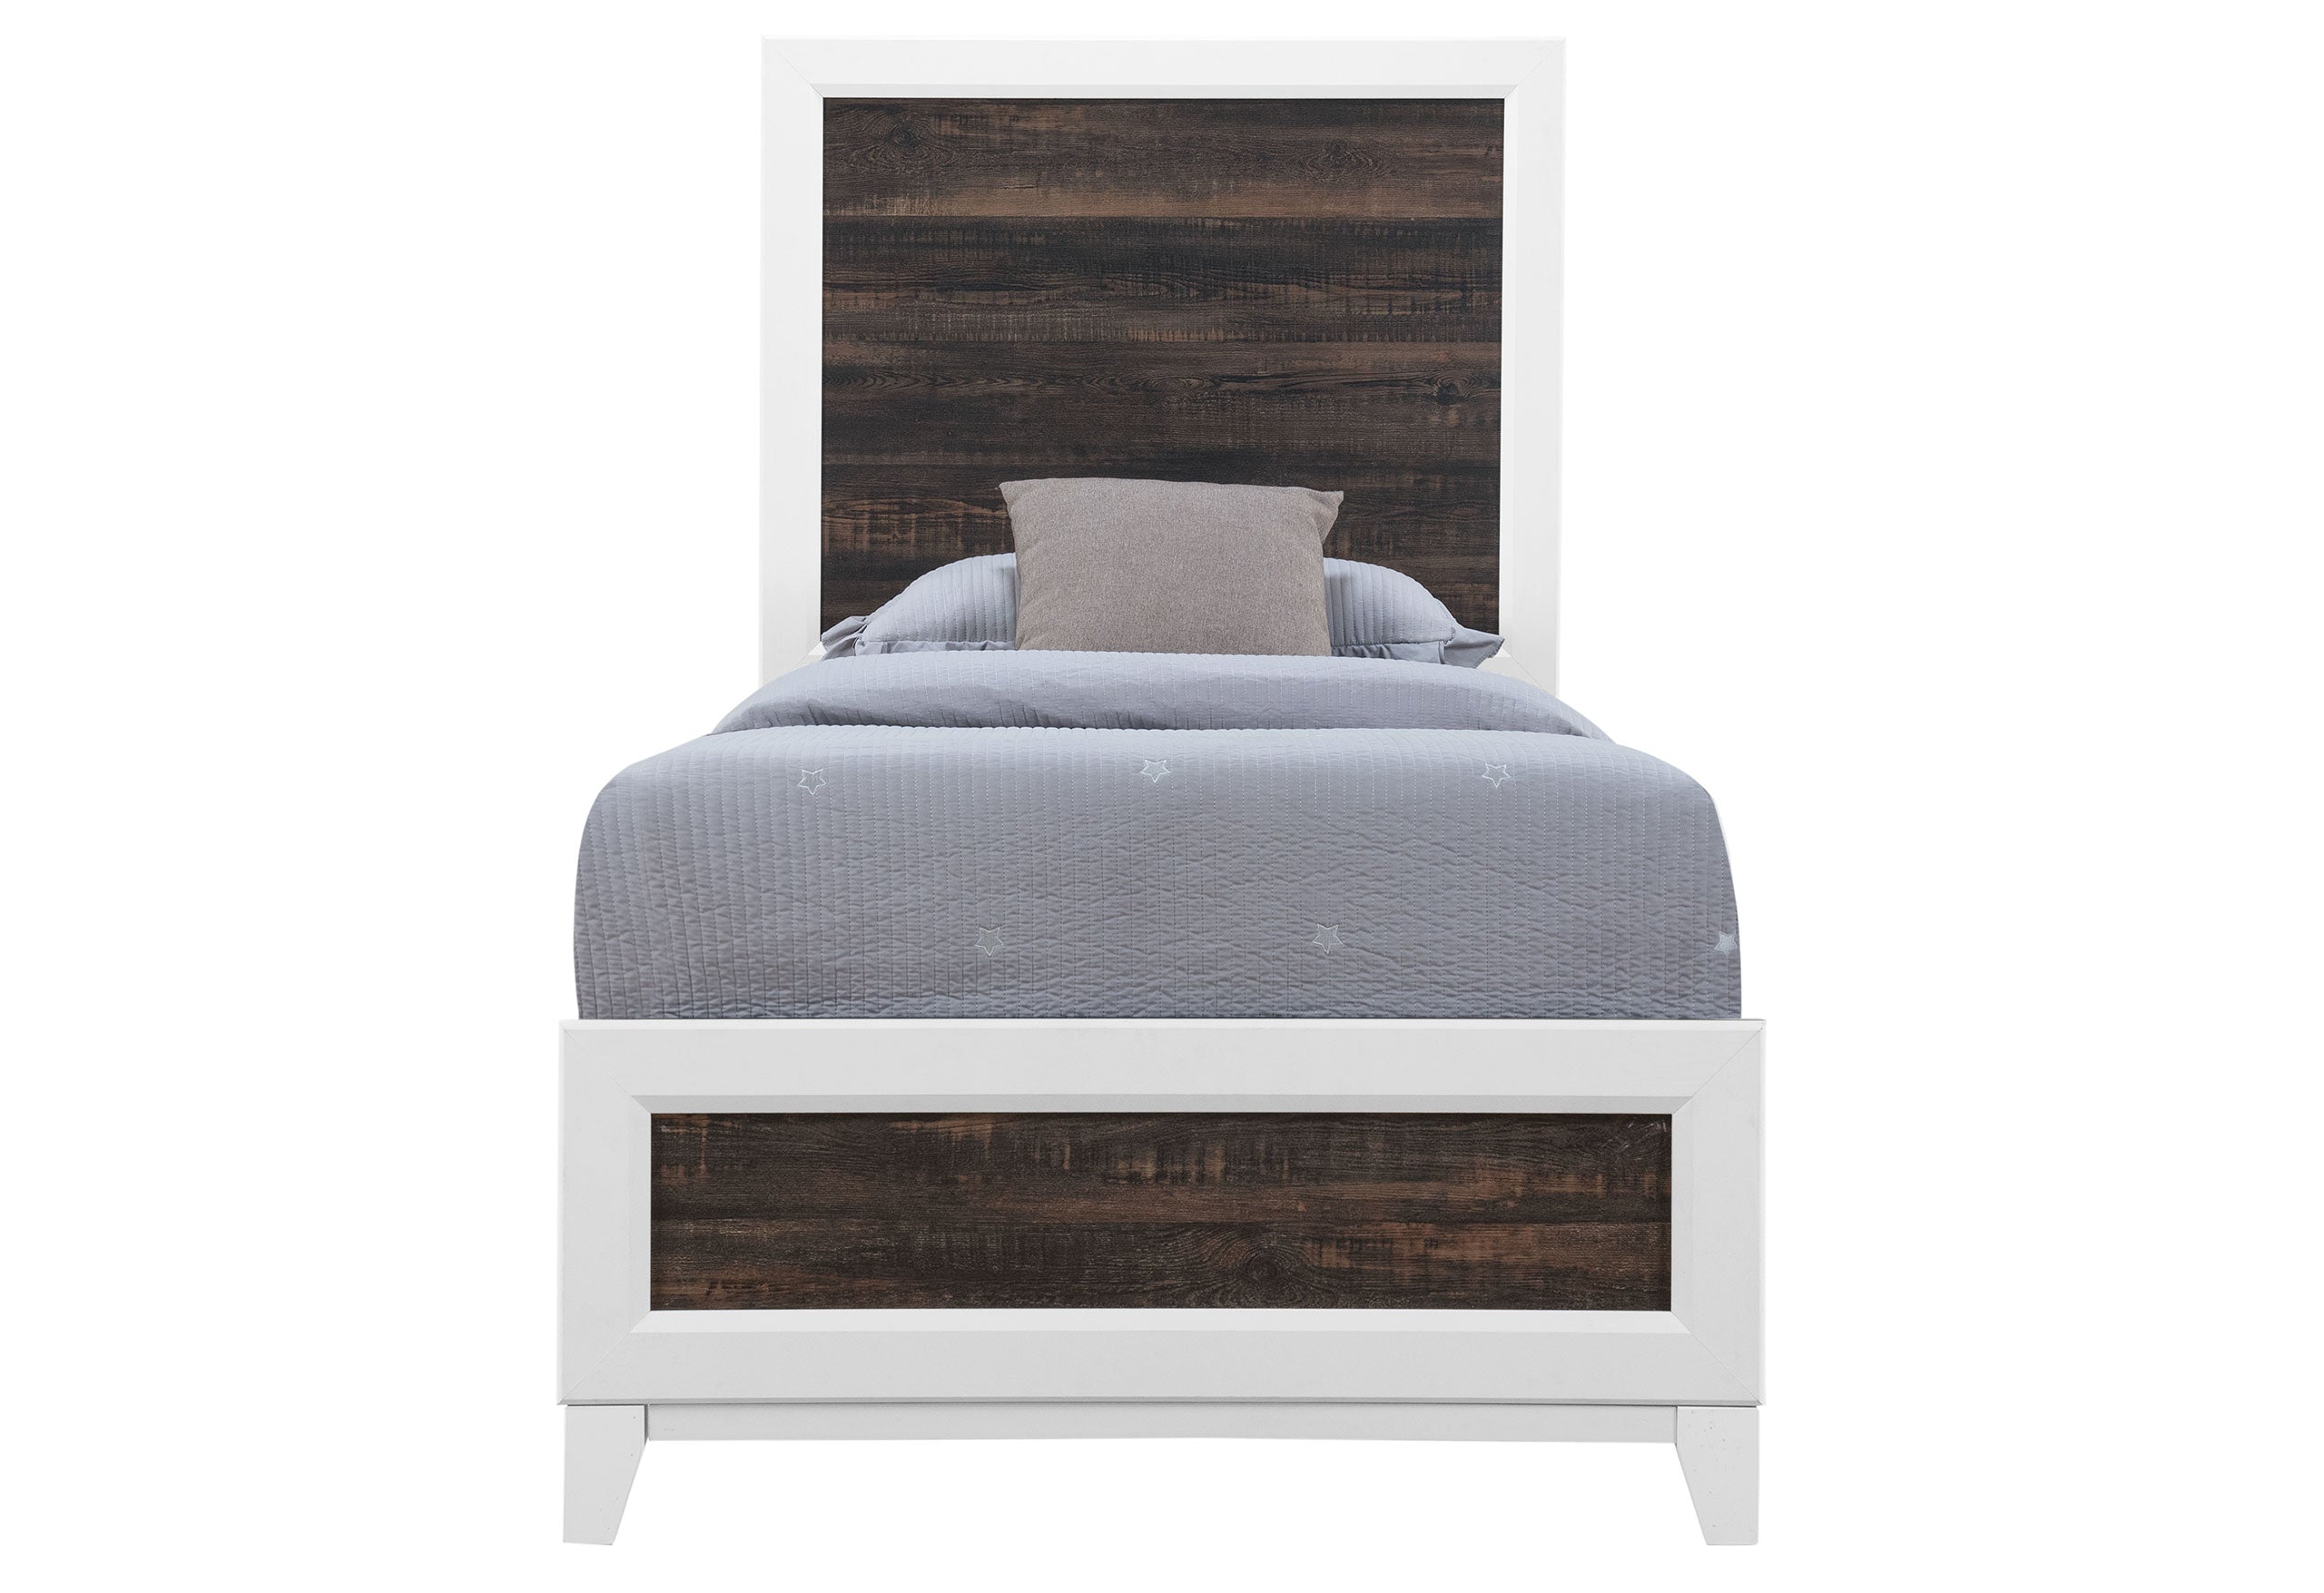 LISBON - FULL BED, KING BED, QUEEN BED, TWIN BED, FULL BED, KING BED, QUEEN BED, TWIN BED